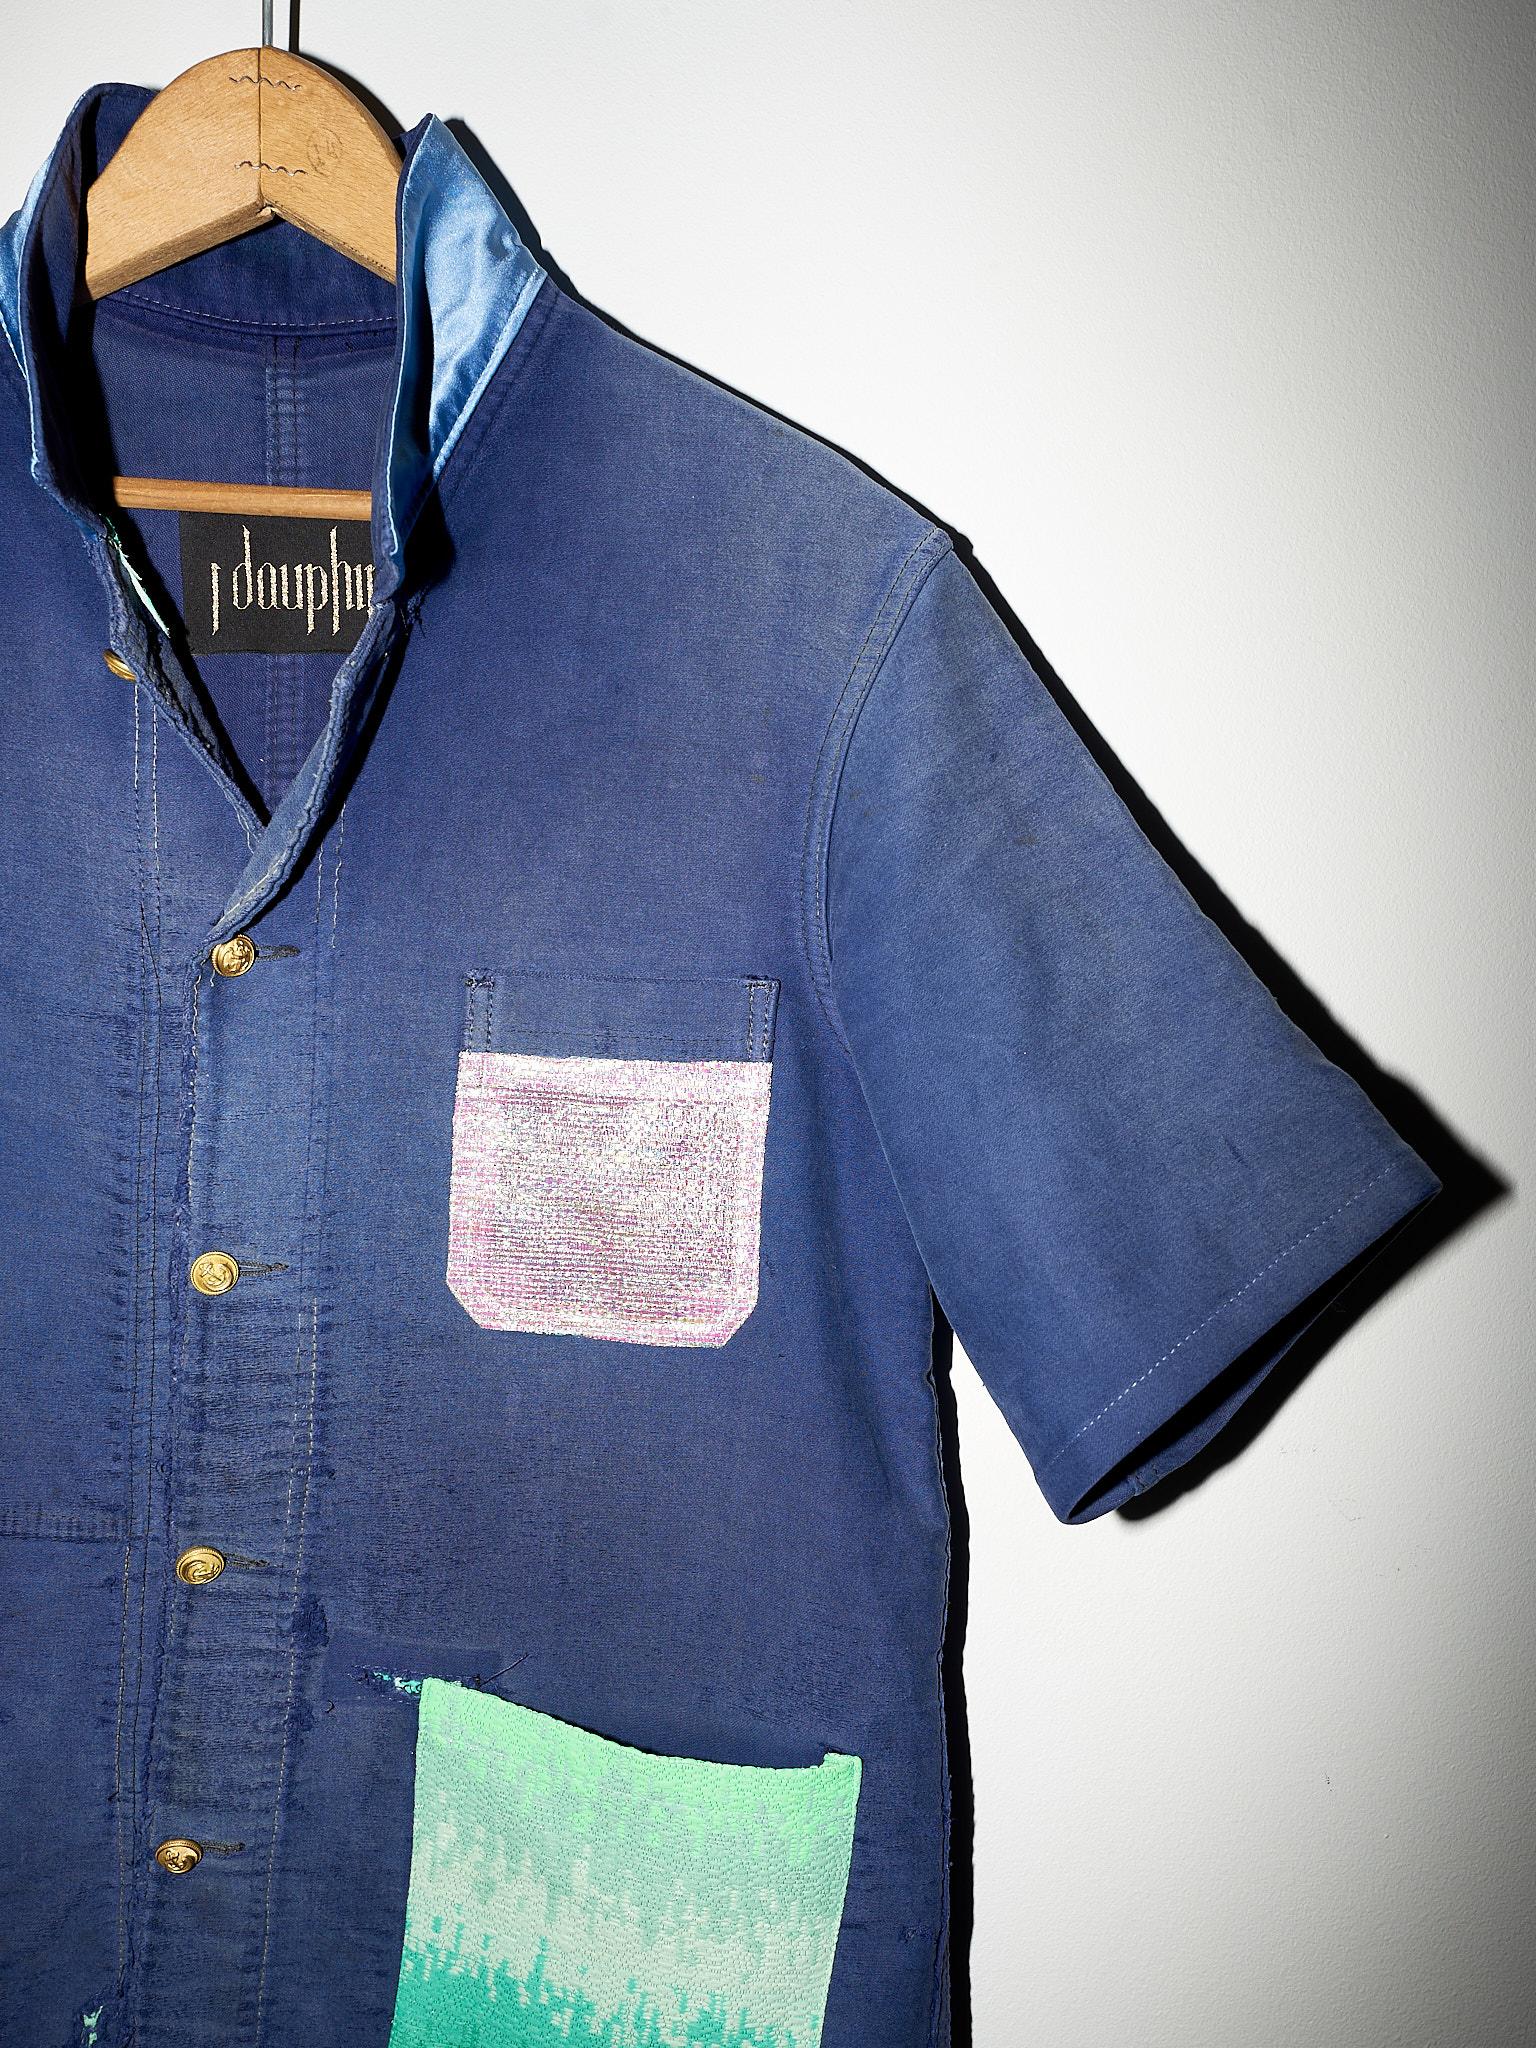 Jacket Blue Green Ombre Short Sleeve French Work Wear Tweed Medium J Dauphin In New Condition In Los Angeles, CA